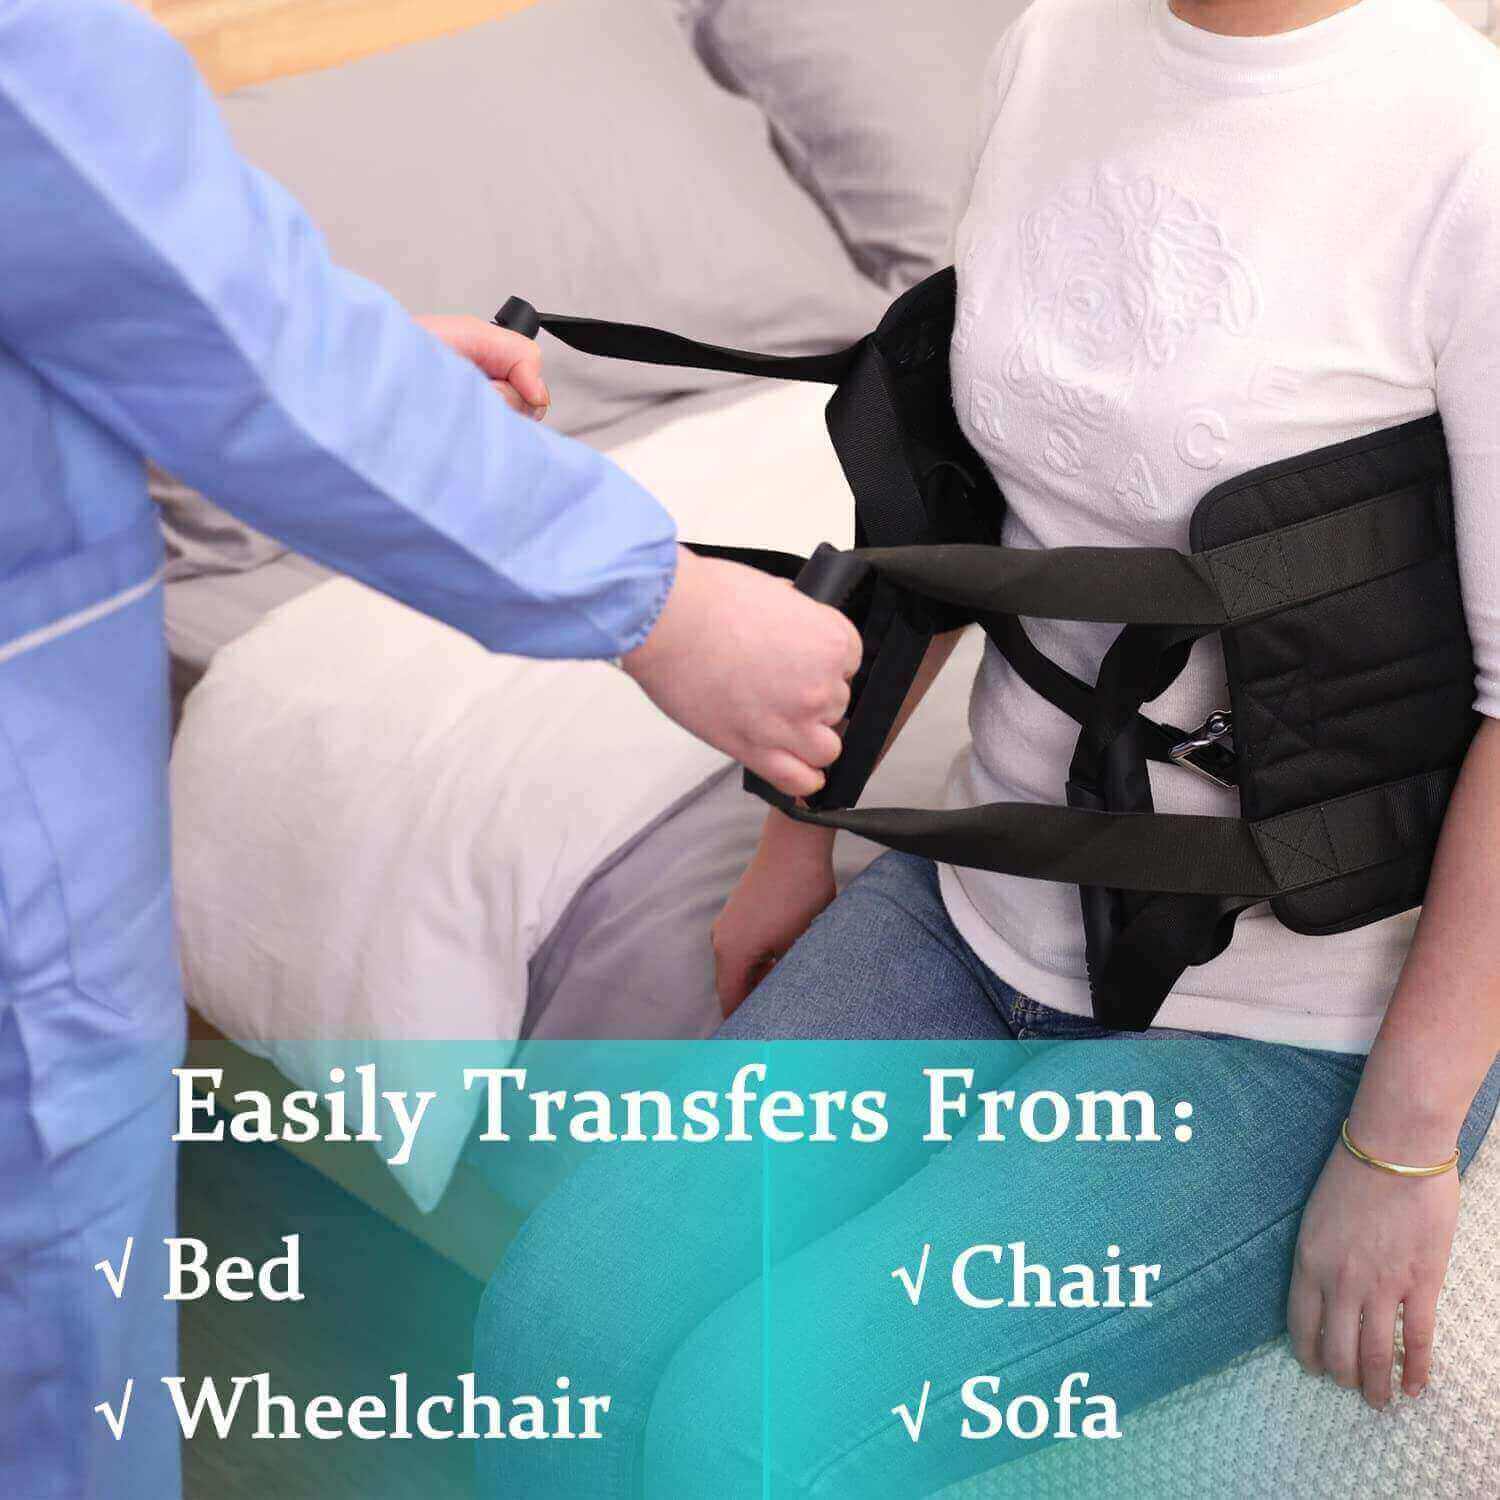 Fanwer 36-inch patient transfer sling with handles for disabled & elderly, using occassions demo